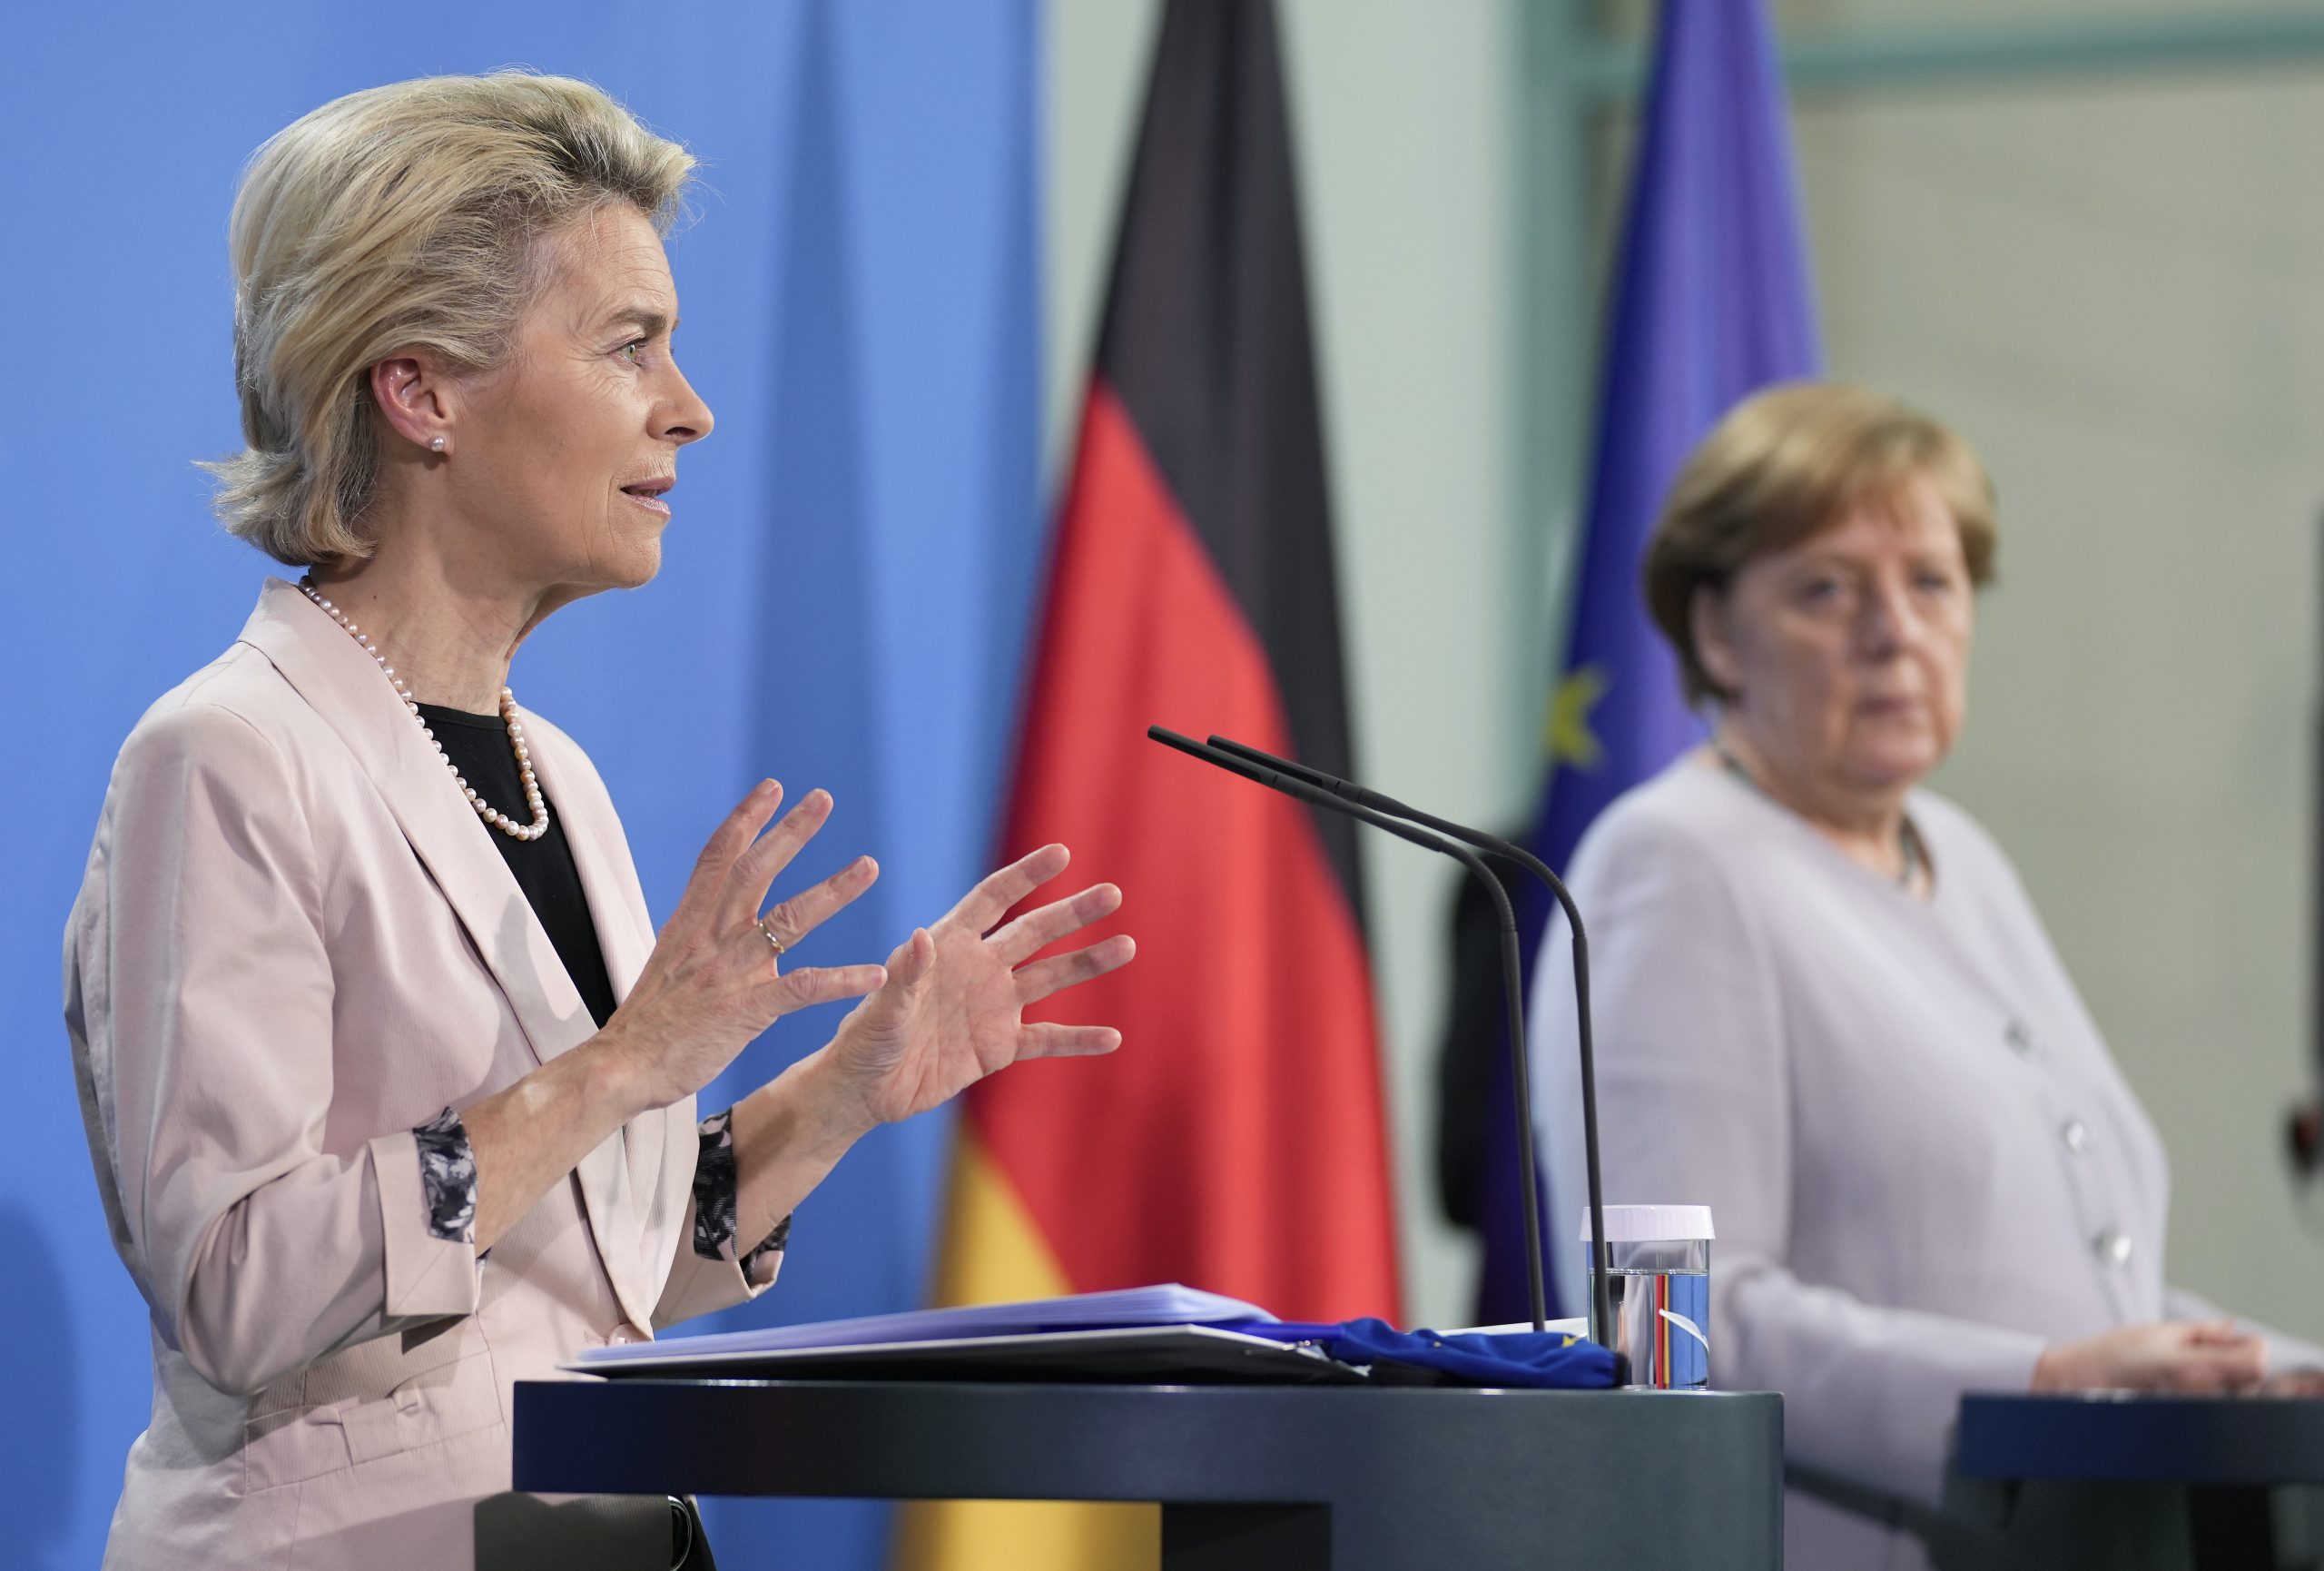 epa09293091 German Chancellor Angela Merkel (R) and Ursula von der Leyen (L), President of the European Commission, address the media during a joint press conference after a meeting in Berlin, Germany, 22 June 2021.  EPA/MICHAEL SOHN / POOL